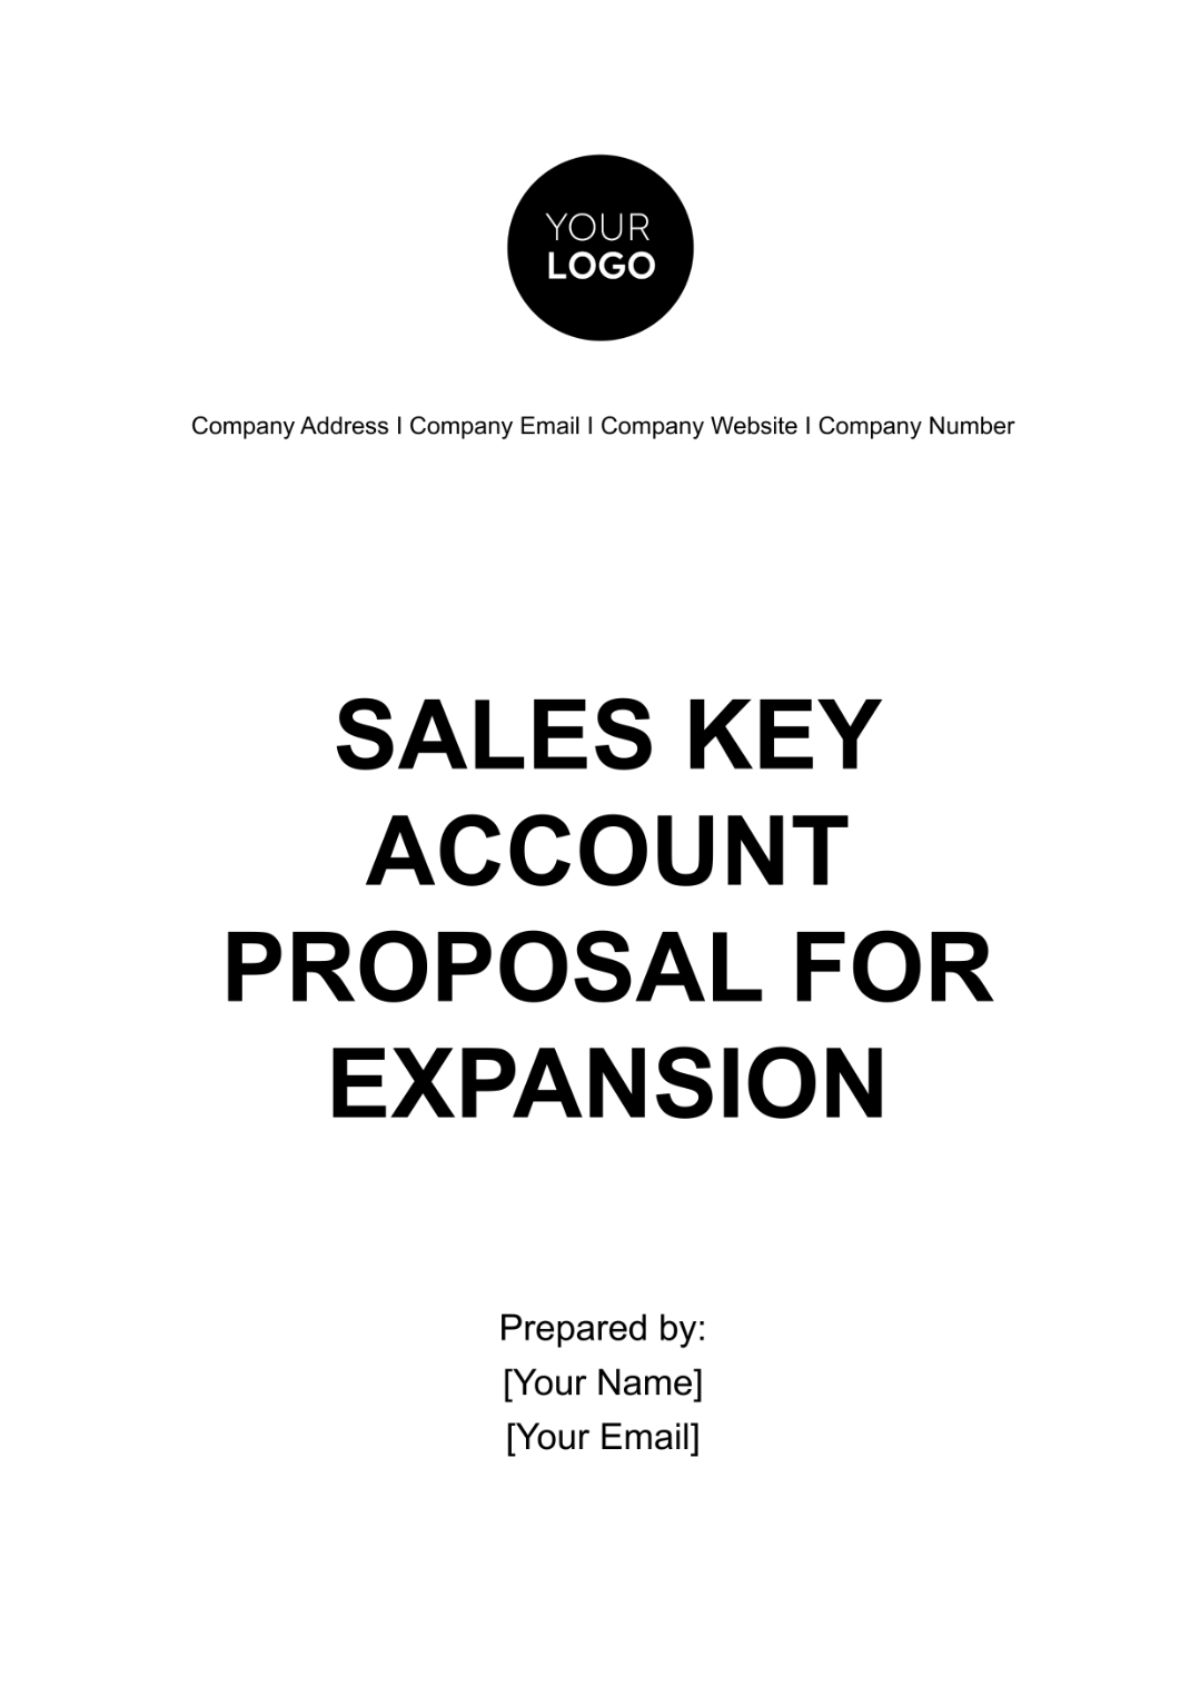 Sales Key Account Proposal for Expansion Template